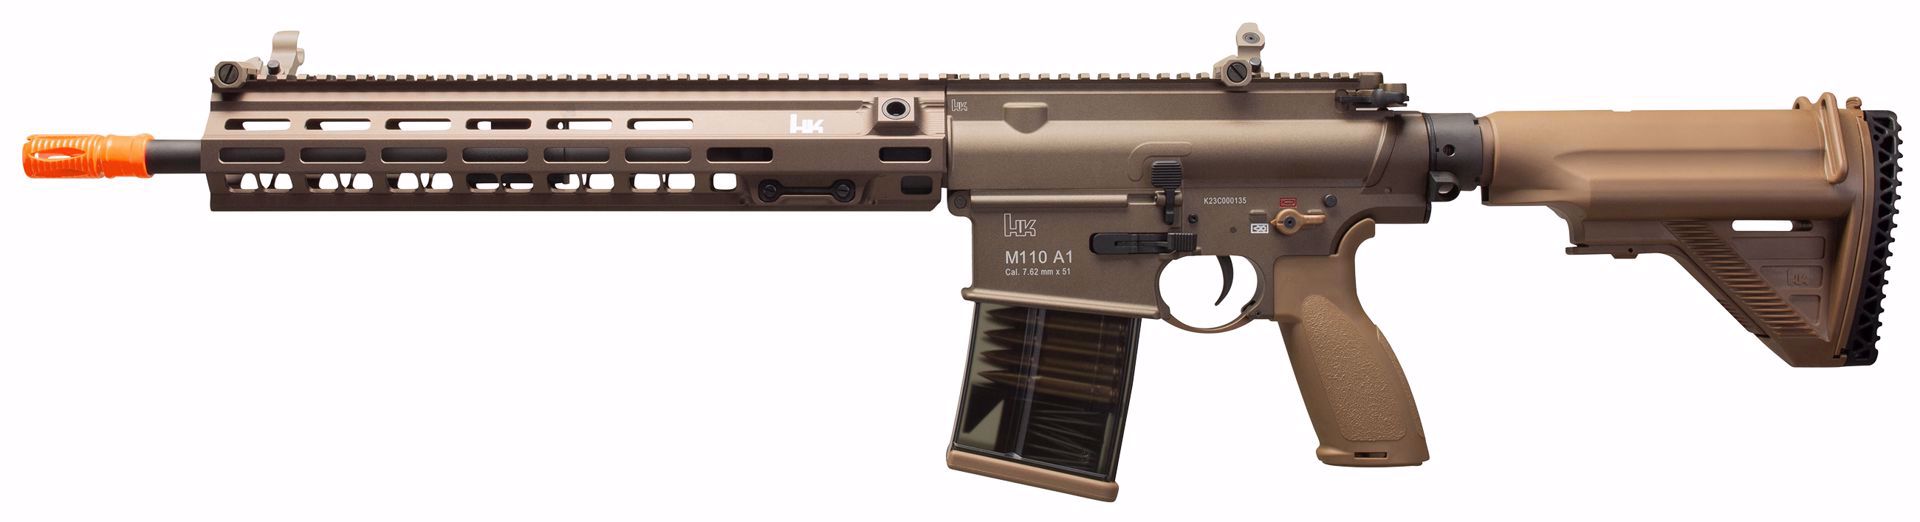 Elite Force HK M110A1 AEG with Gate Aster